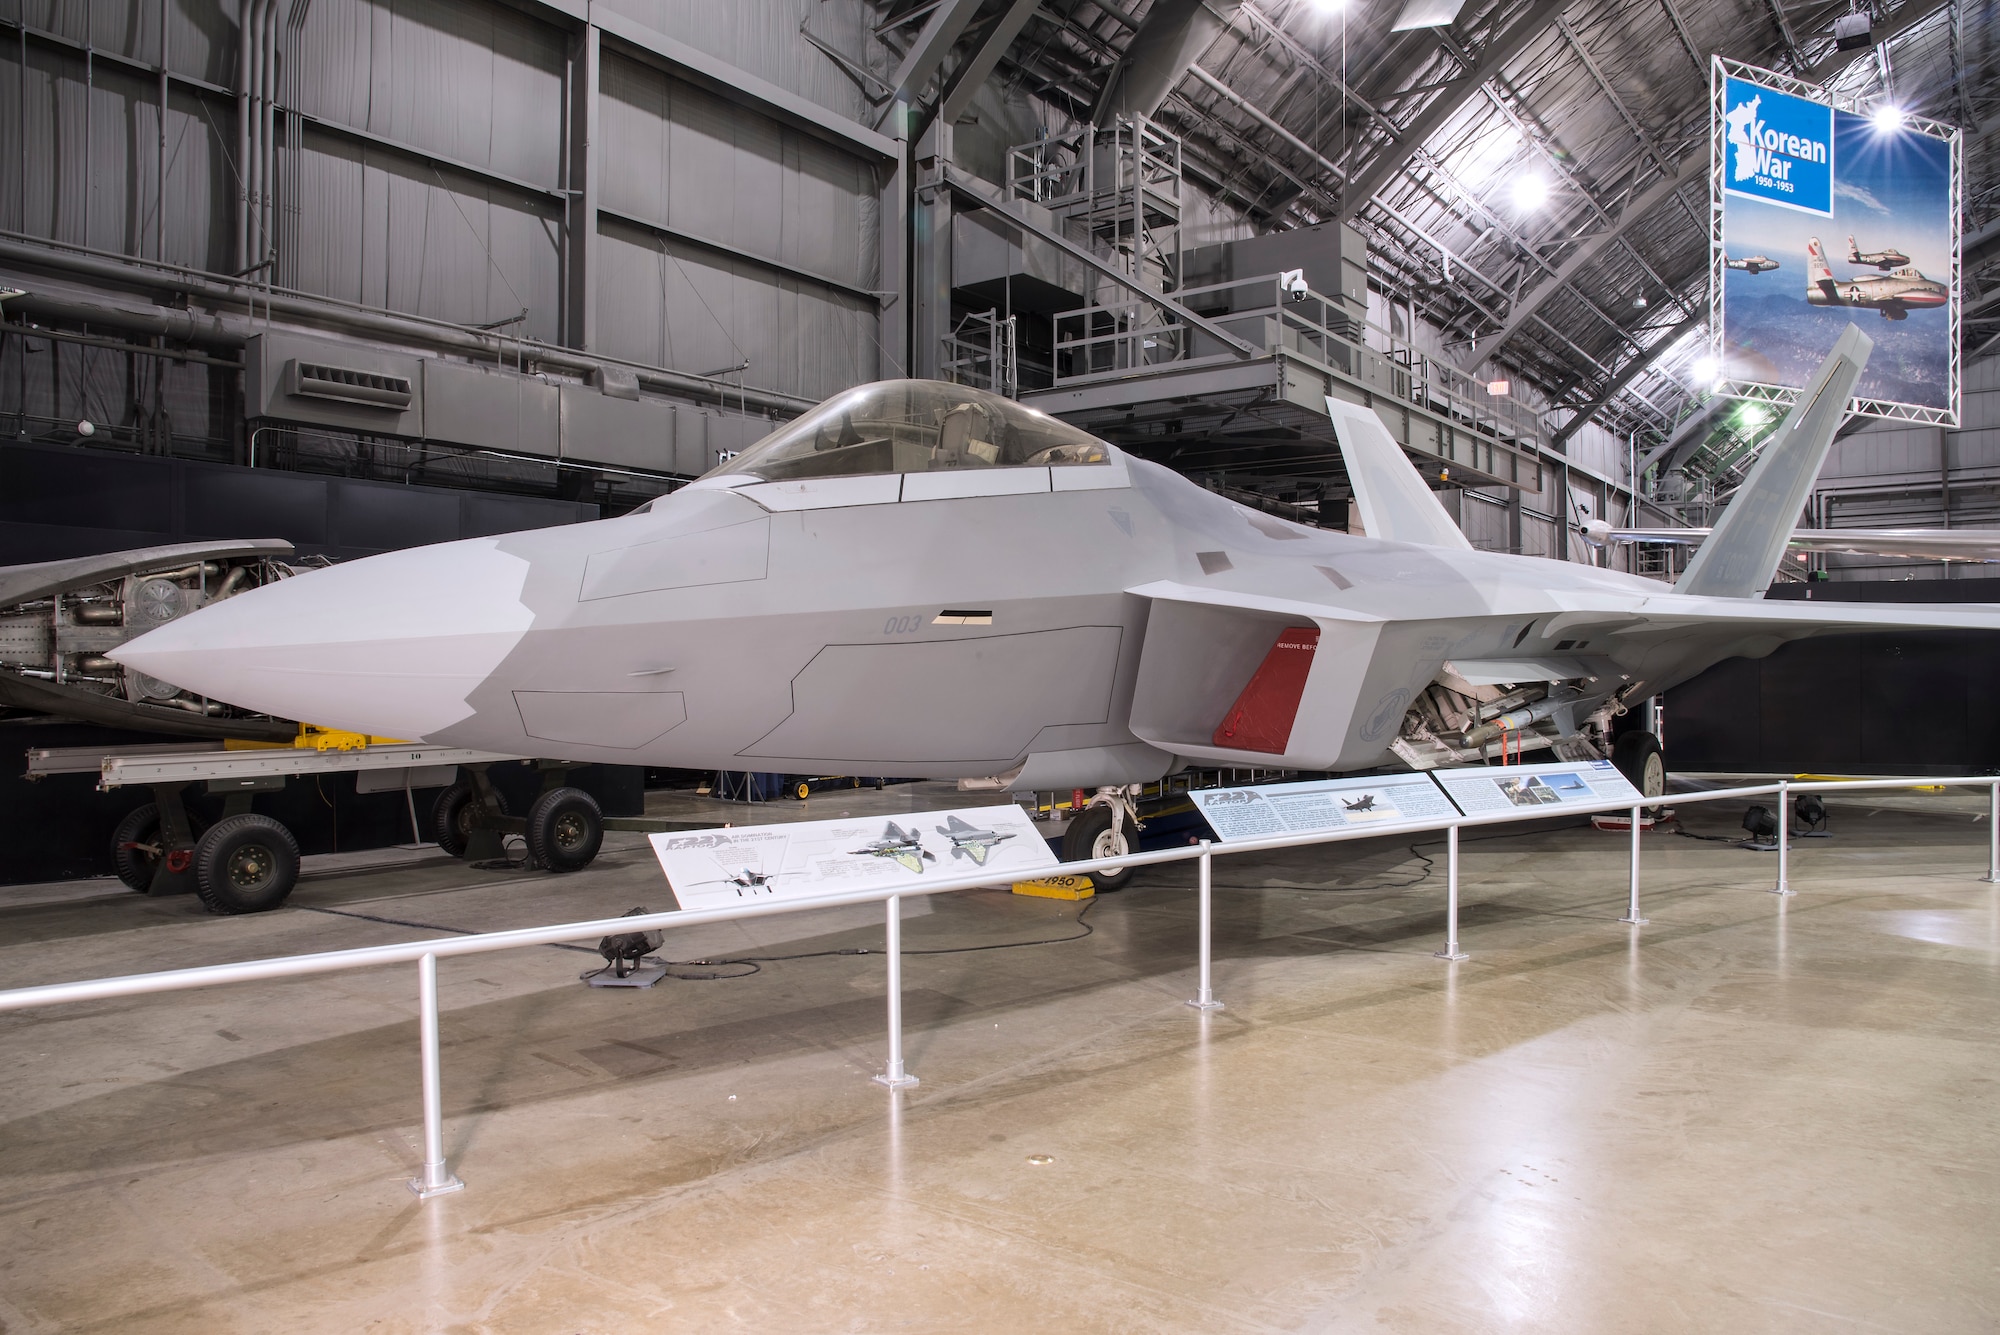 DAYTON, Ohio - Lockheed Martin F-22A Raptor at the National Museum of the U.S. Air Force. (U.S. Air Force photo)